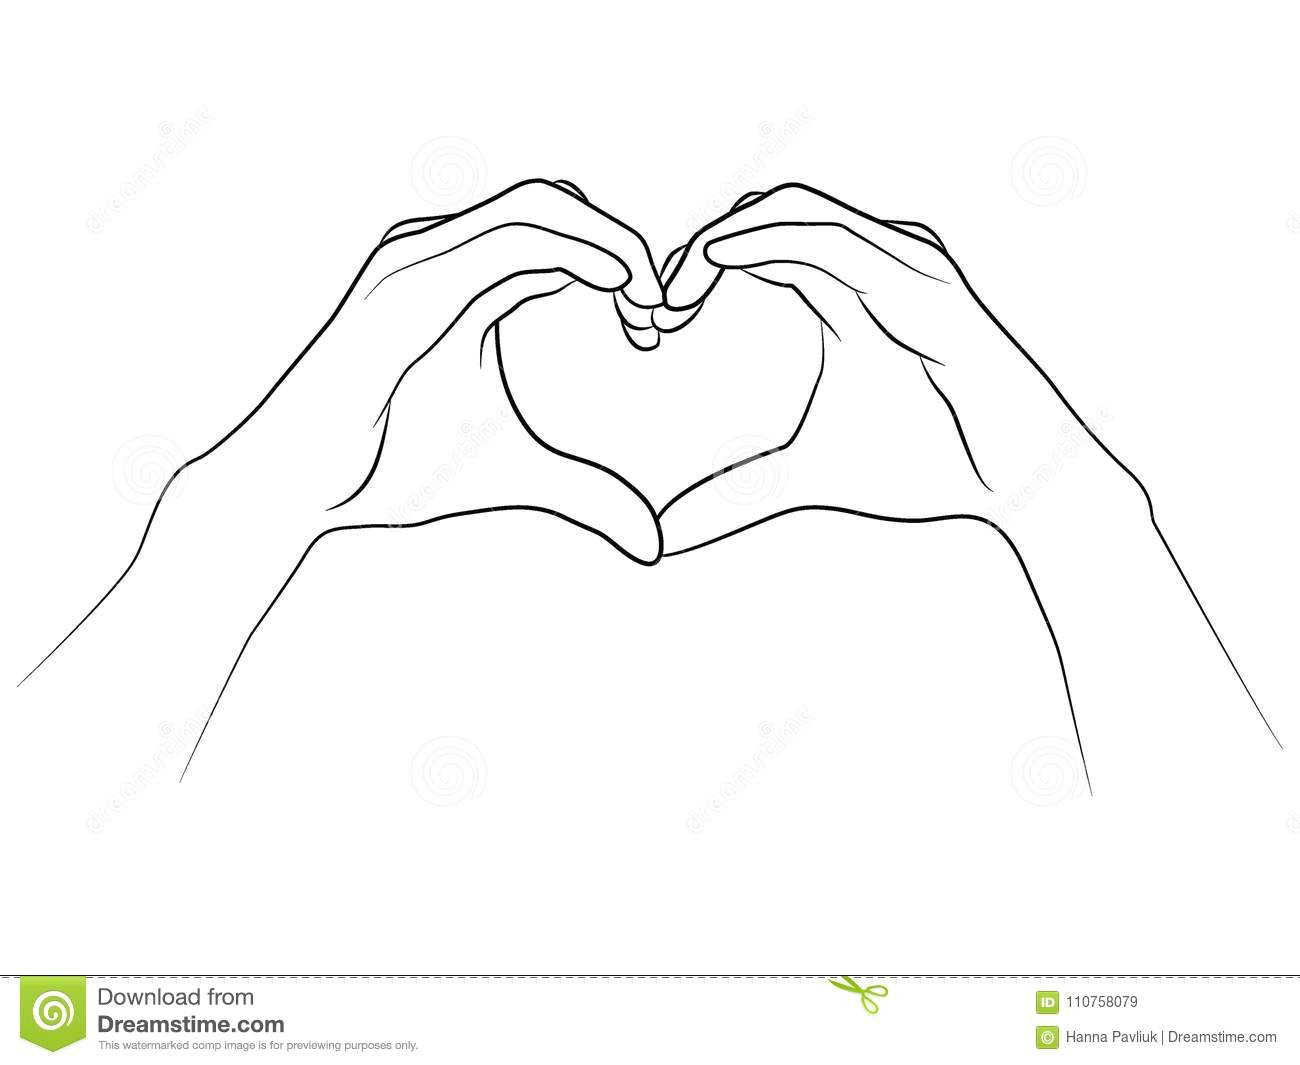 black and white hands folded together in the shape of a heart